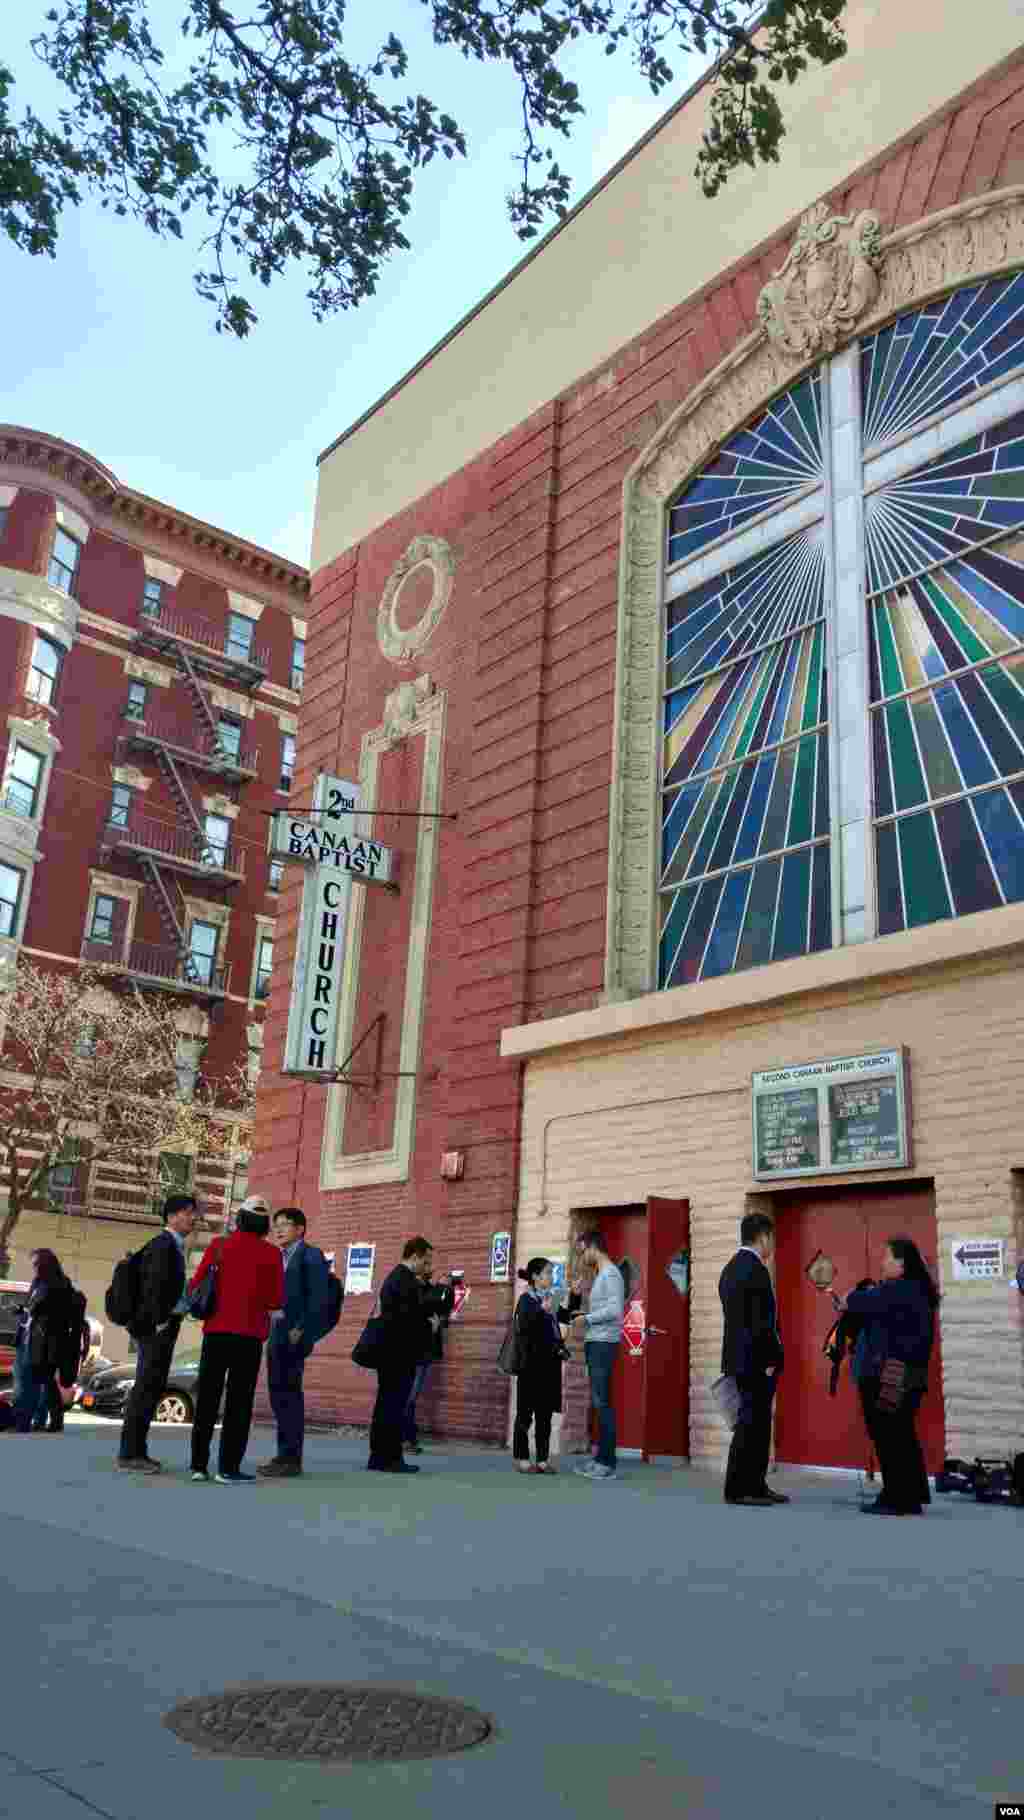 Voters line up outside a voting center at the 2nd Canaan Baptist Church in South Central Harlem, New York, April 19, 2016. (T. Trinh / VOA) 